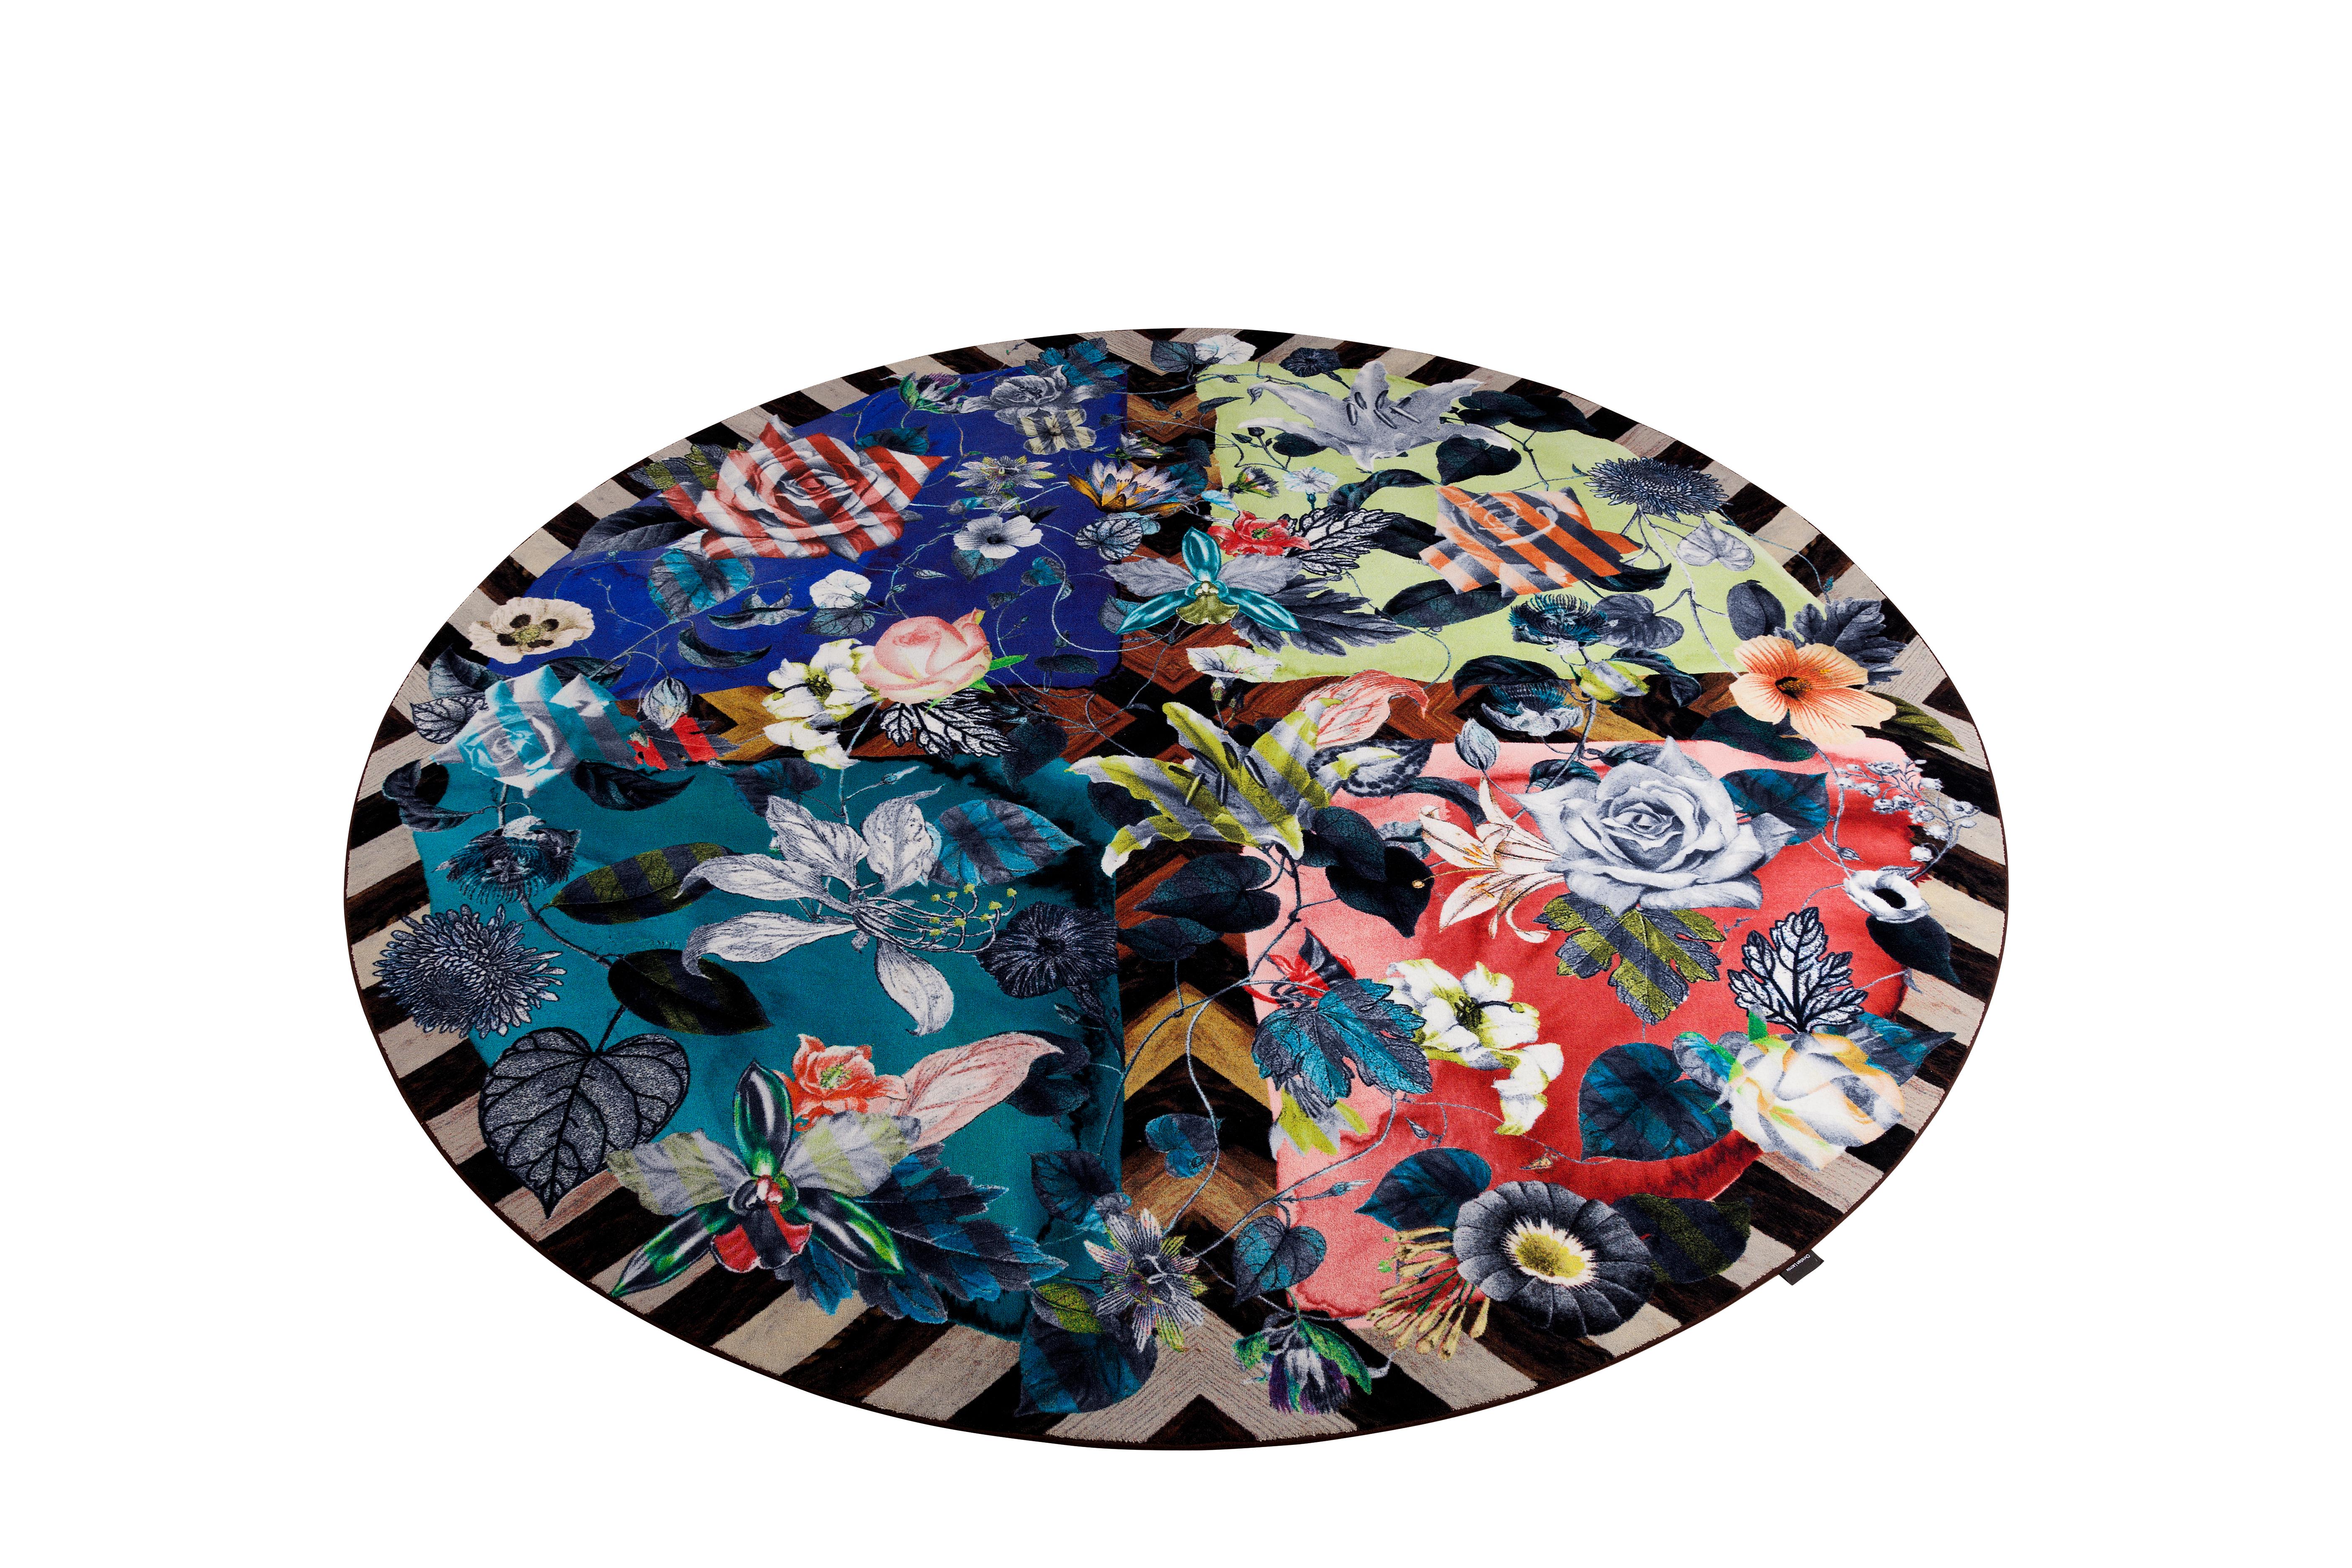 Moooi large Guimauve rug in wool by Christian Lacroix Maison

Since the launch of the Couture House in 1987, the Christian Lacroix style has been unique, exuberant, colorful and baroque. Today, Christian Lacroix Maison expresses its dynamism and